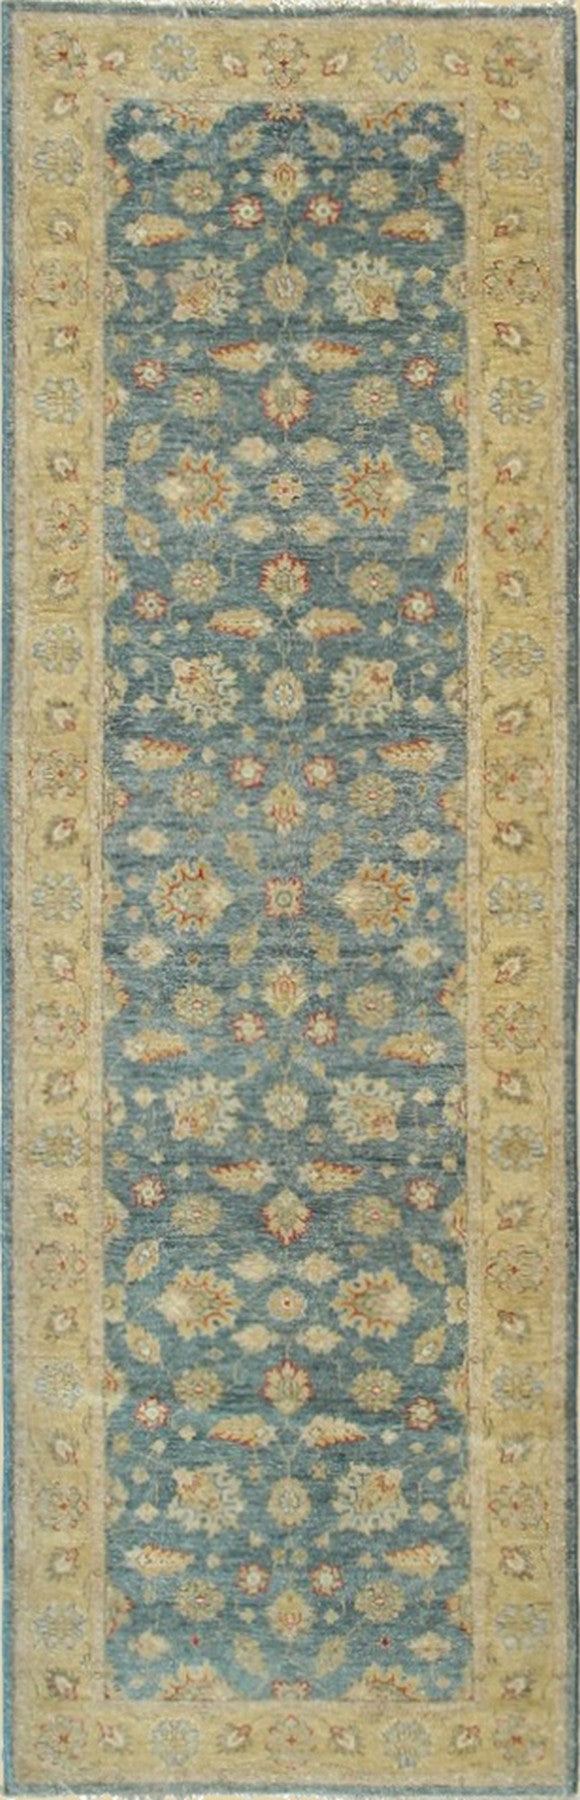 Blue/gold Hand Knotted Wool Traditional Oriental Agra Rug, Made in India